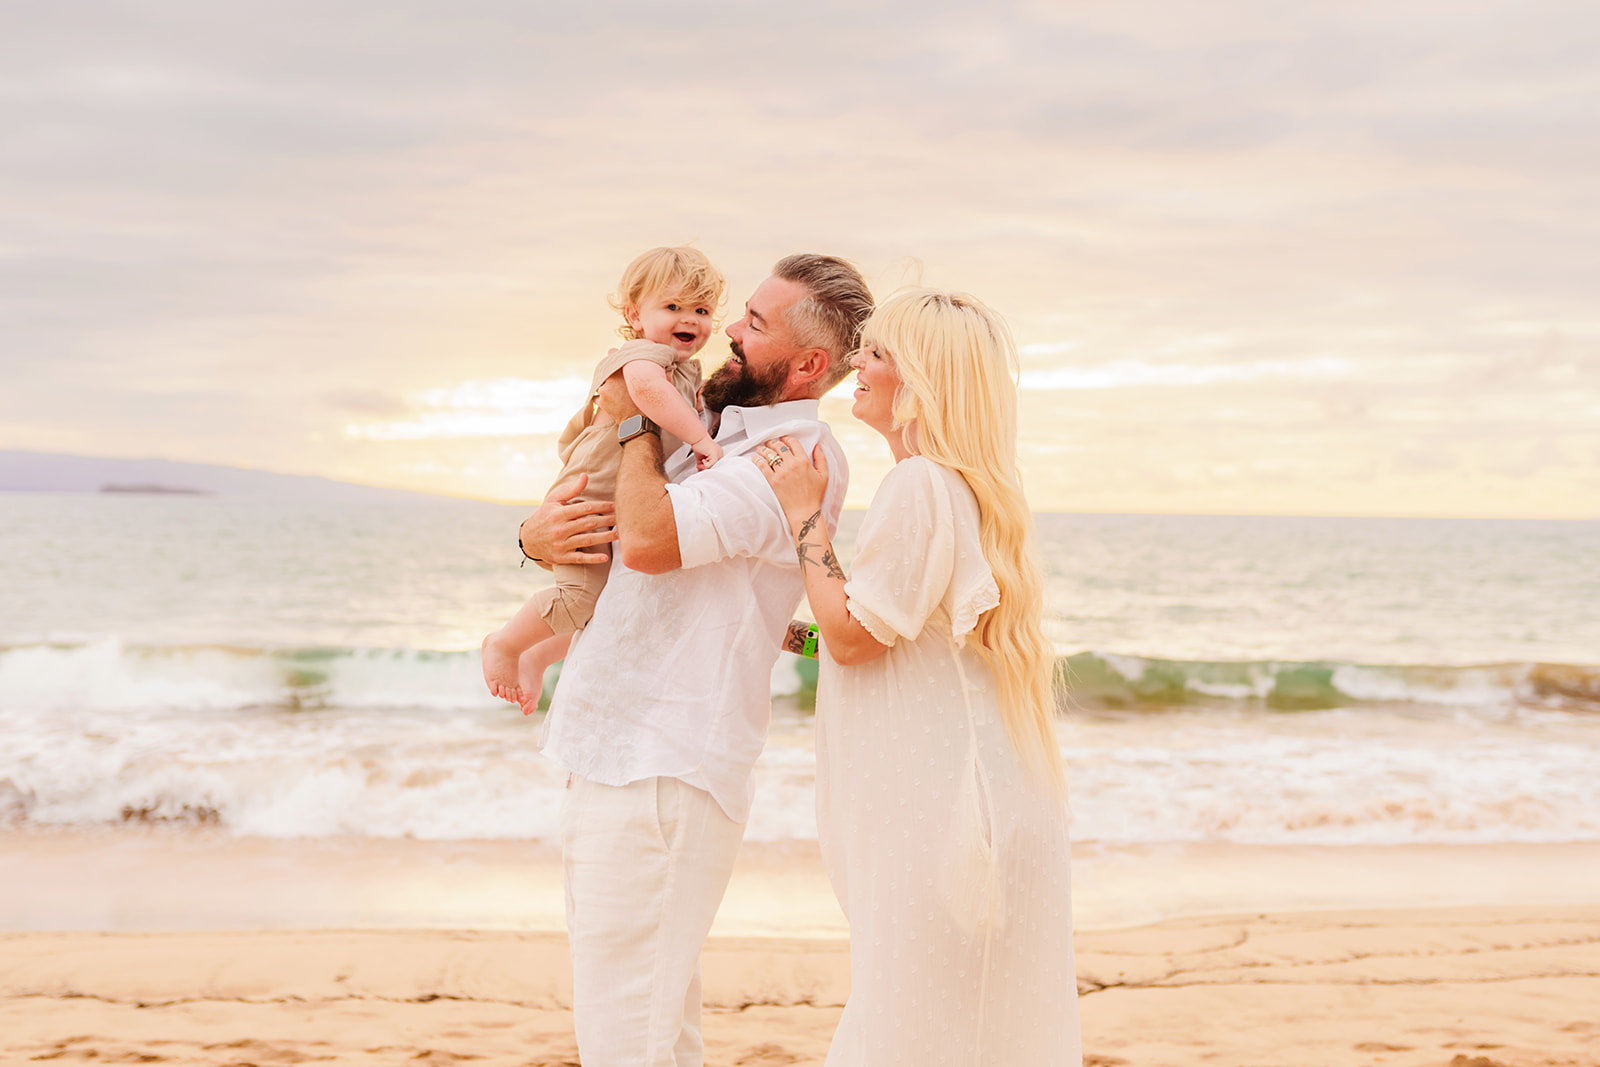 A family playing together on the beach for a sunset maternity photoshoot with a toddler in Wailea on Maui with Love + Water photography.